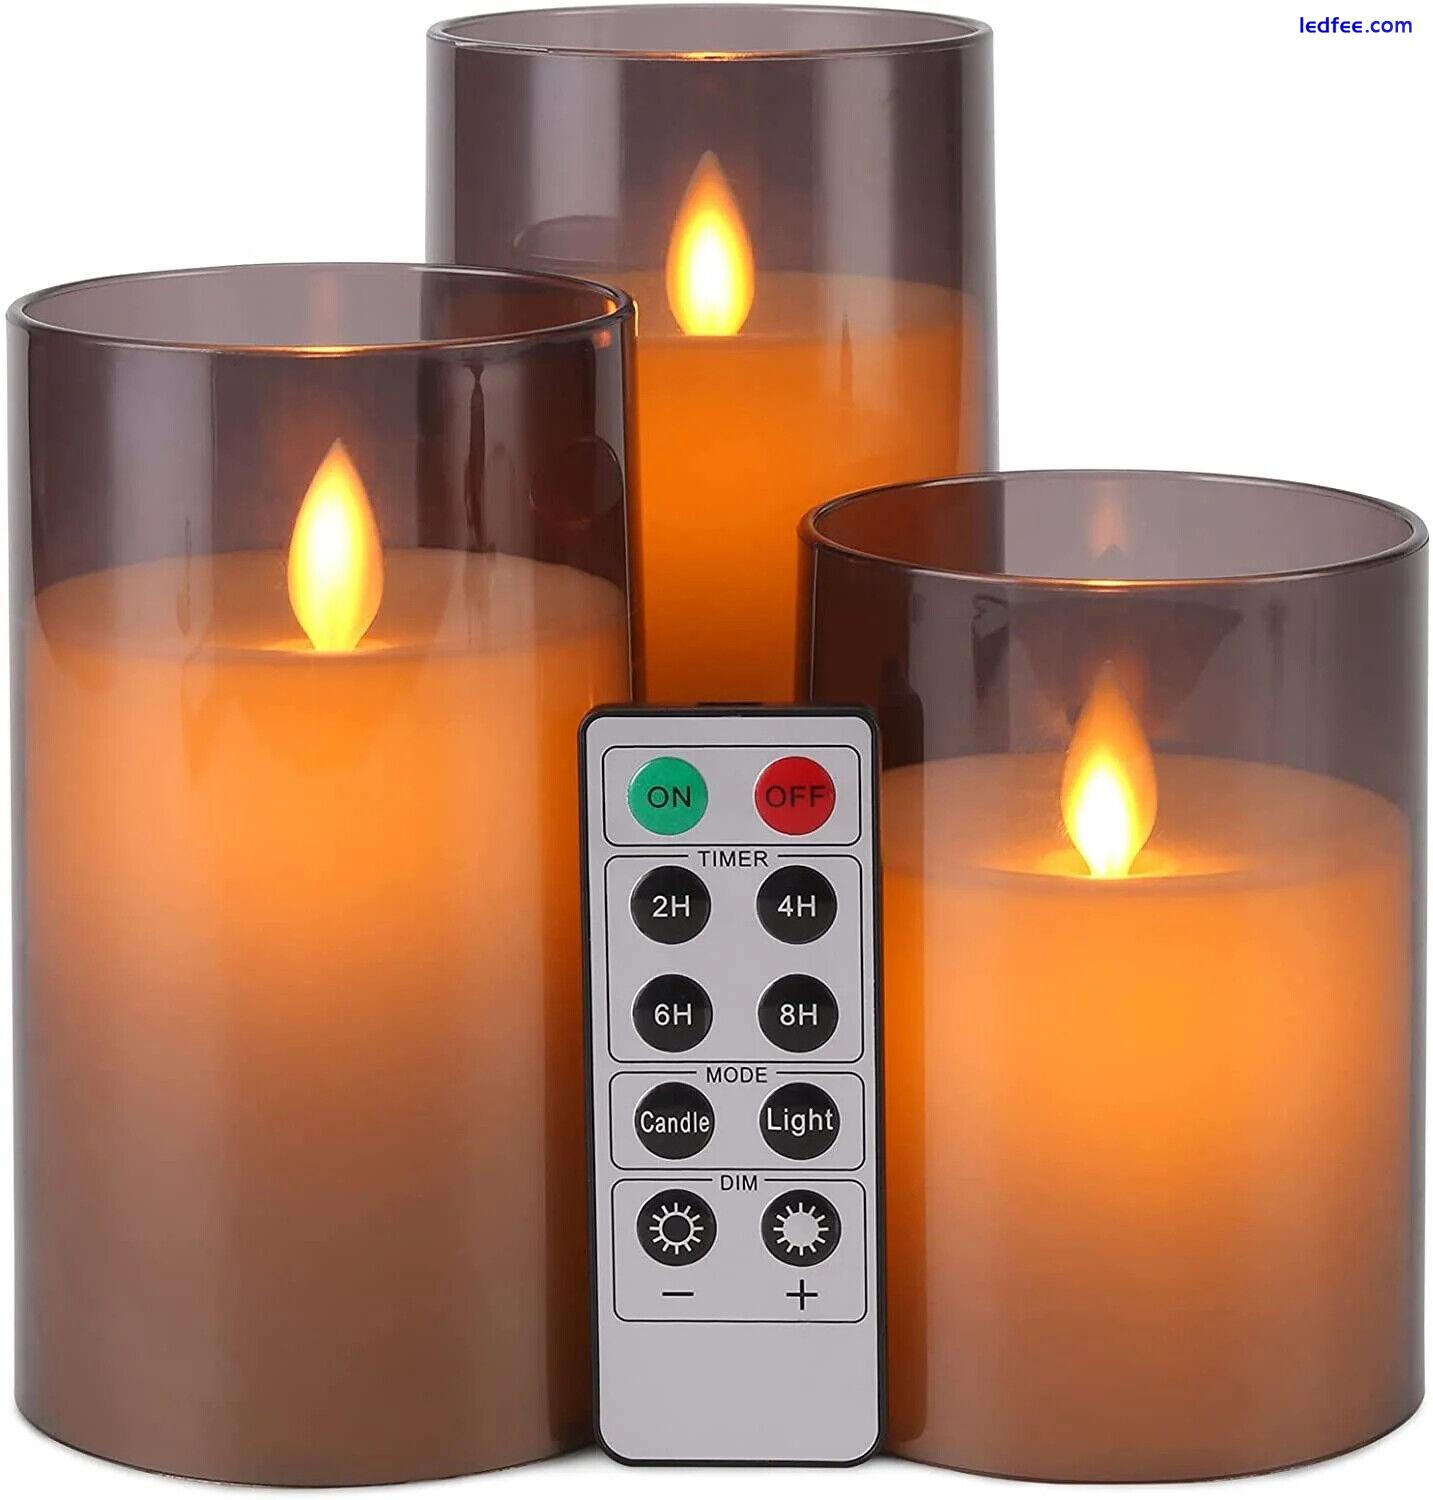 3 pieces/set of LED flameless electric candles, glass wedding party tea lights 5 